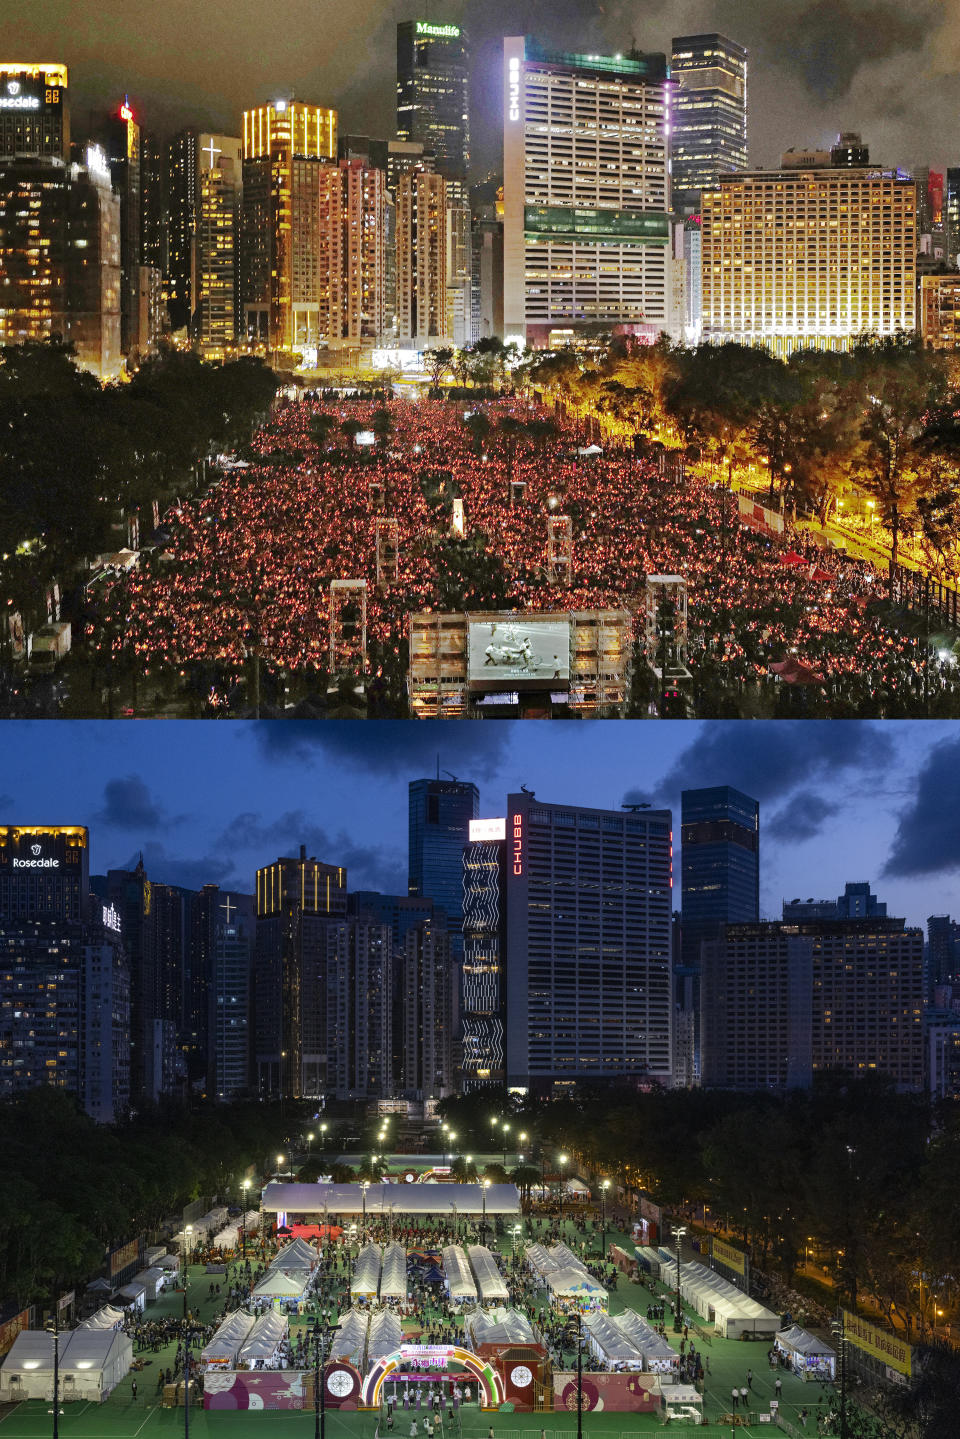 In this two photo combination image, at top thousands of people attend the annual candlelight vigil in Hong Kong's Victoria Park, June 4, 2019 to mark the anniversary of the military crackdown on the 1989 pro-democracy student movement in Beijing, and bottom shows the same venue taken over by a carnival organized by pro-Beijing groups to mark the city's 1997 handover to China on the 34th anniversary of the crackdown, June 4, 2023. (AP Photo)